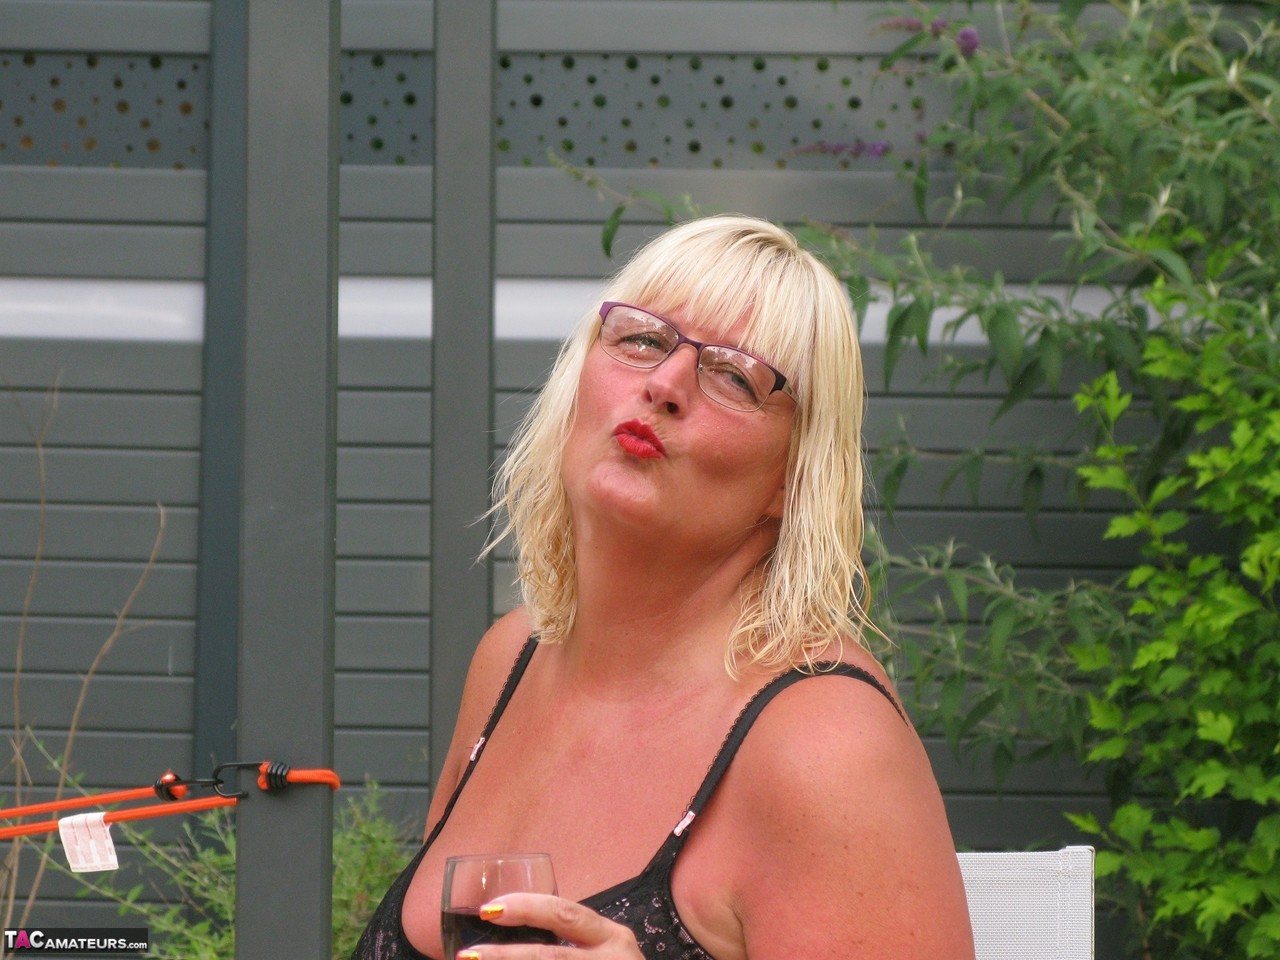 Older blonde BBW Chrissy Uk gives a BJ after going topless in a garden setting ポルノ写真 #428341424